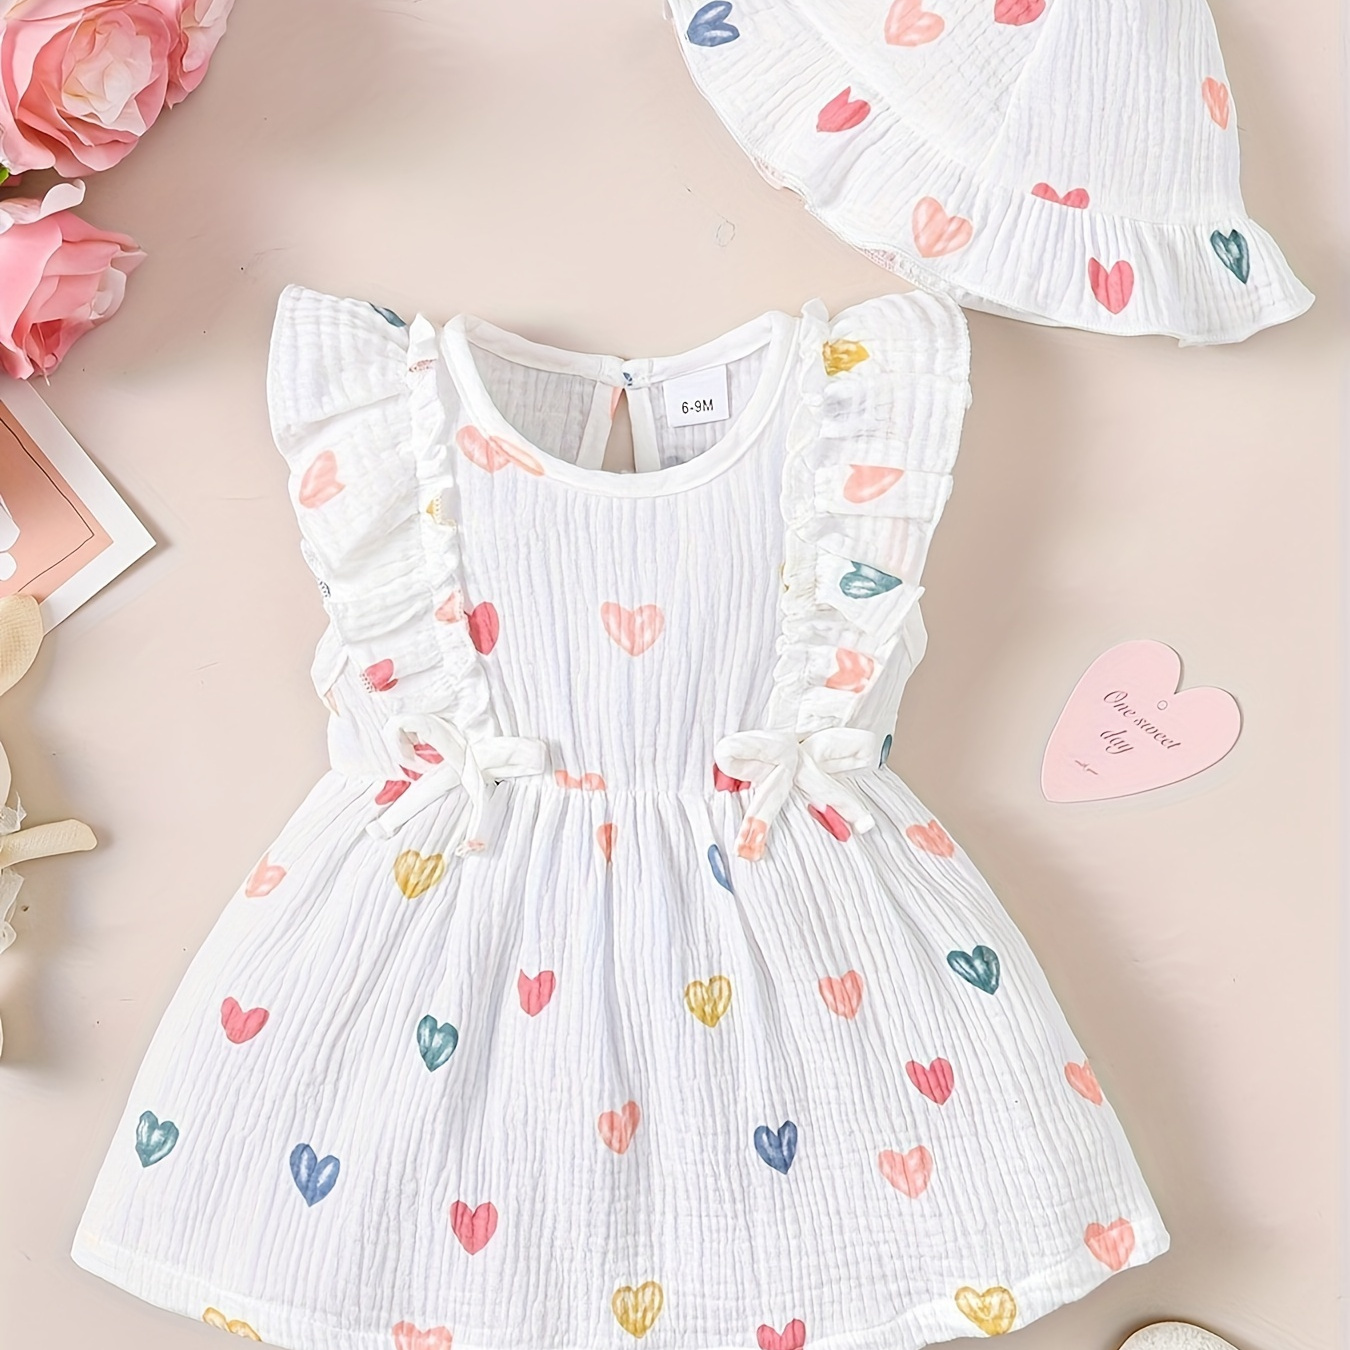 

Baby's Cartoon Colorful Heart Full Print Cotton Muslin Dress & Hat, Ruffle & Bowknot Decor Sleeveless Dress, Infant & Toddler Girl's Clothing For Summer/spring